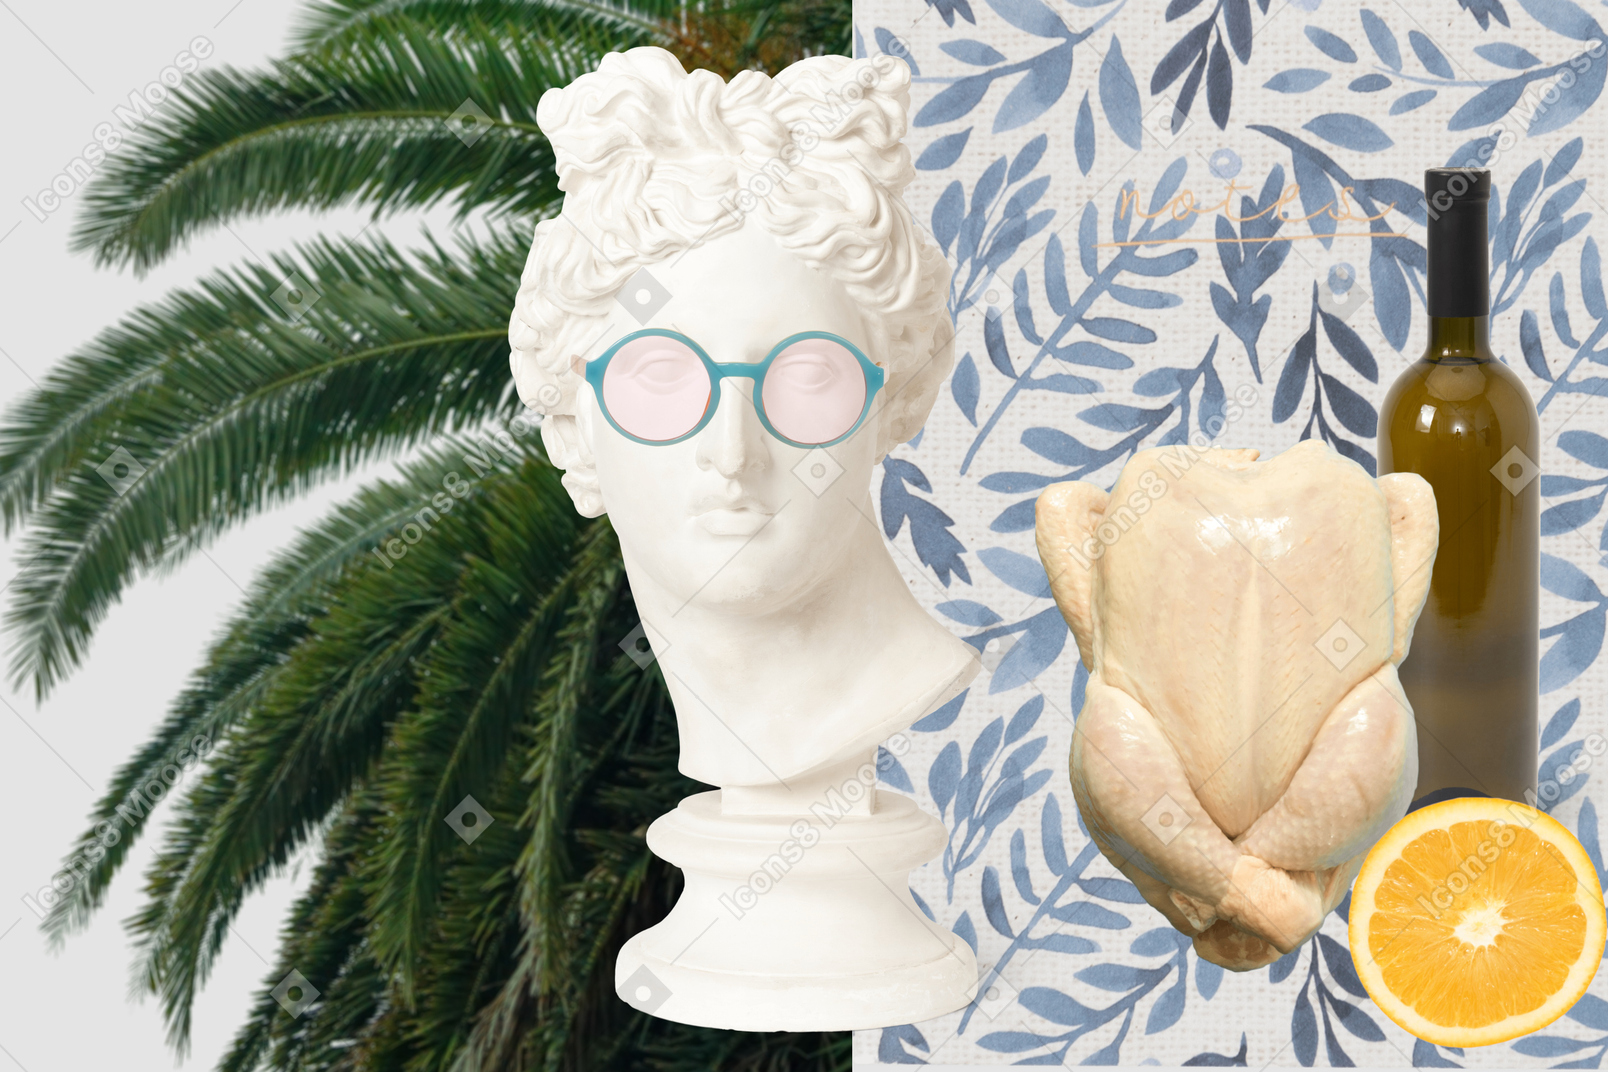 Statue bust, raw chicken, lemon, wine bottle and tropical leaves